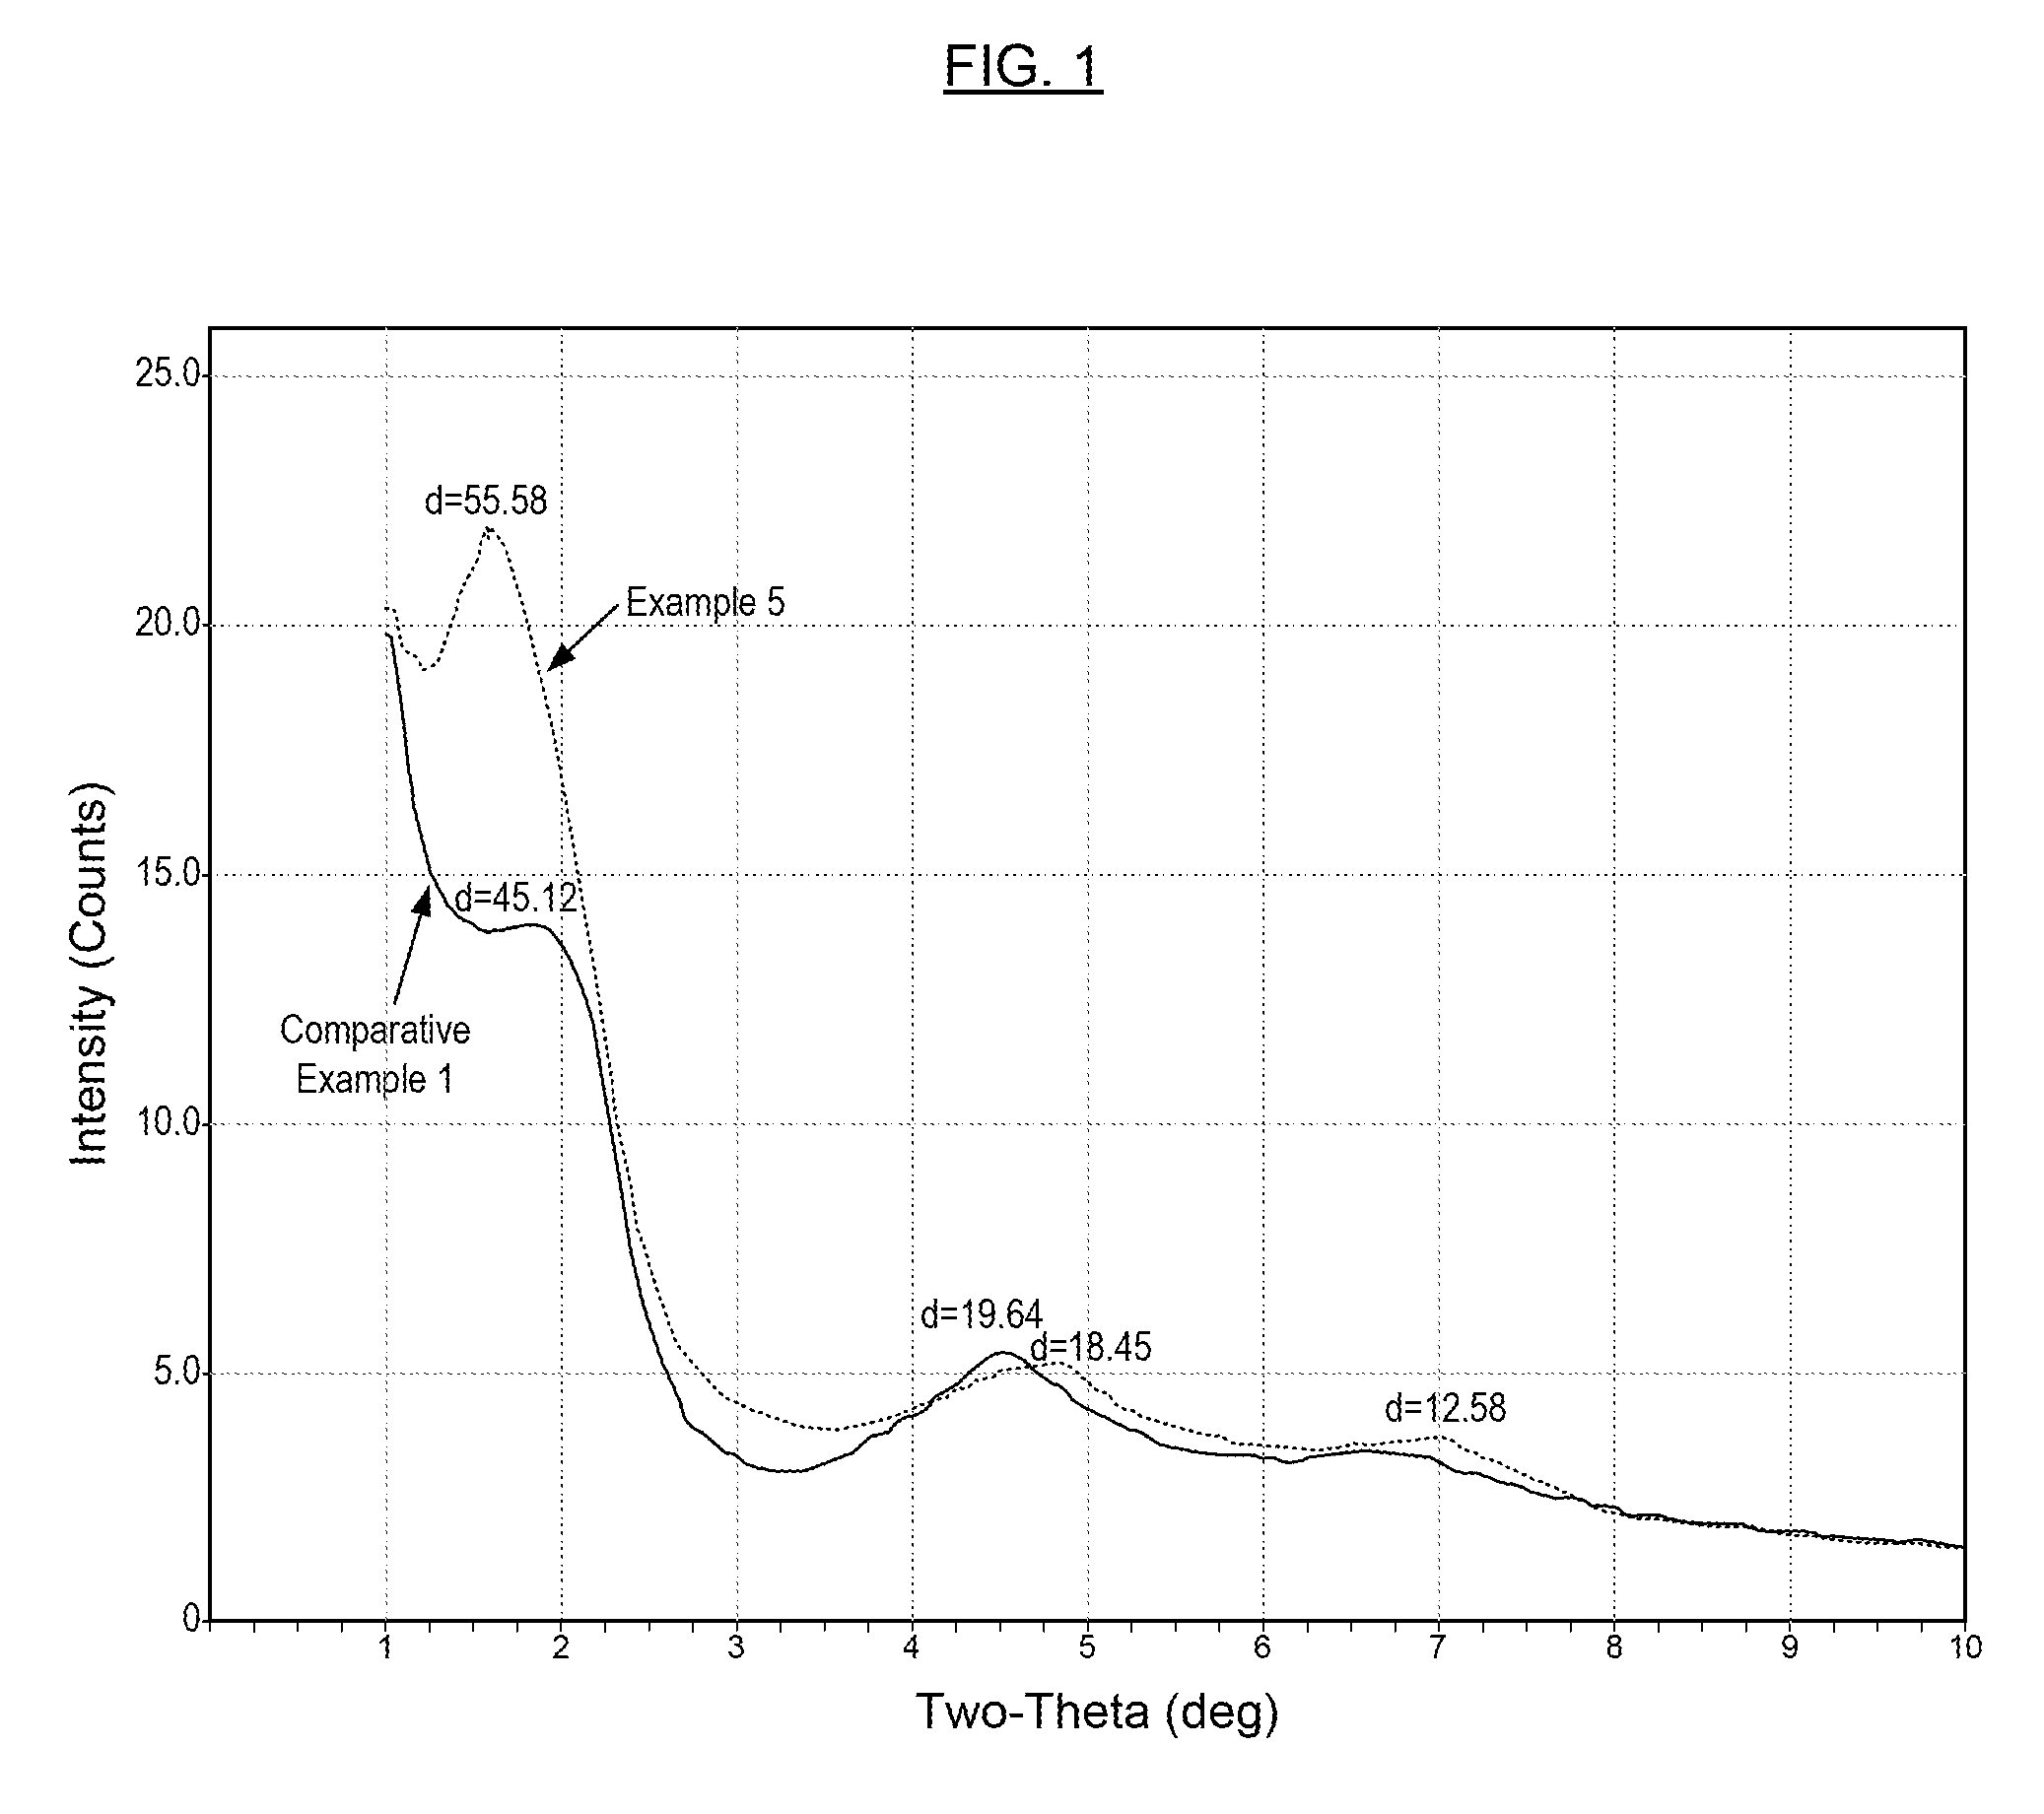 Metal Carboxylate Clays, Derivatives of Metal Carboxylate Clays, Methods for Making the Same, and Compositions Containing the Same